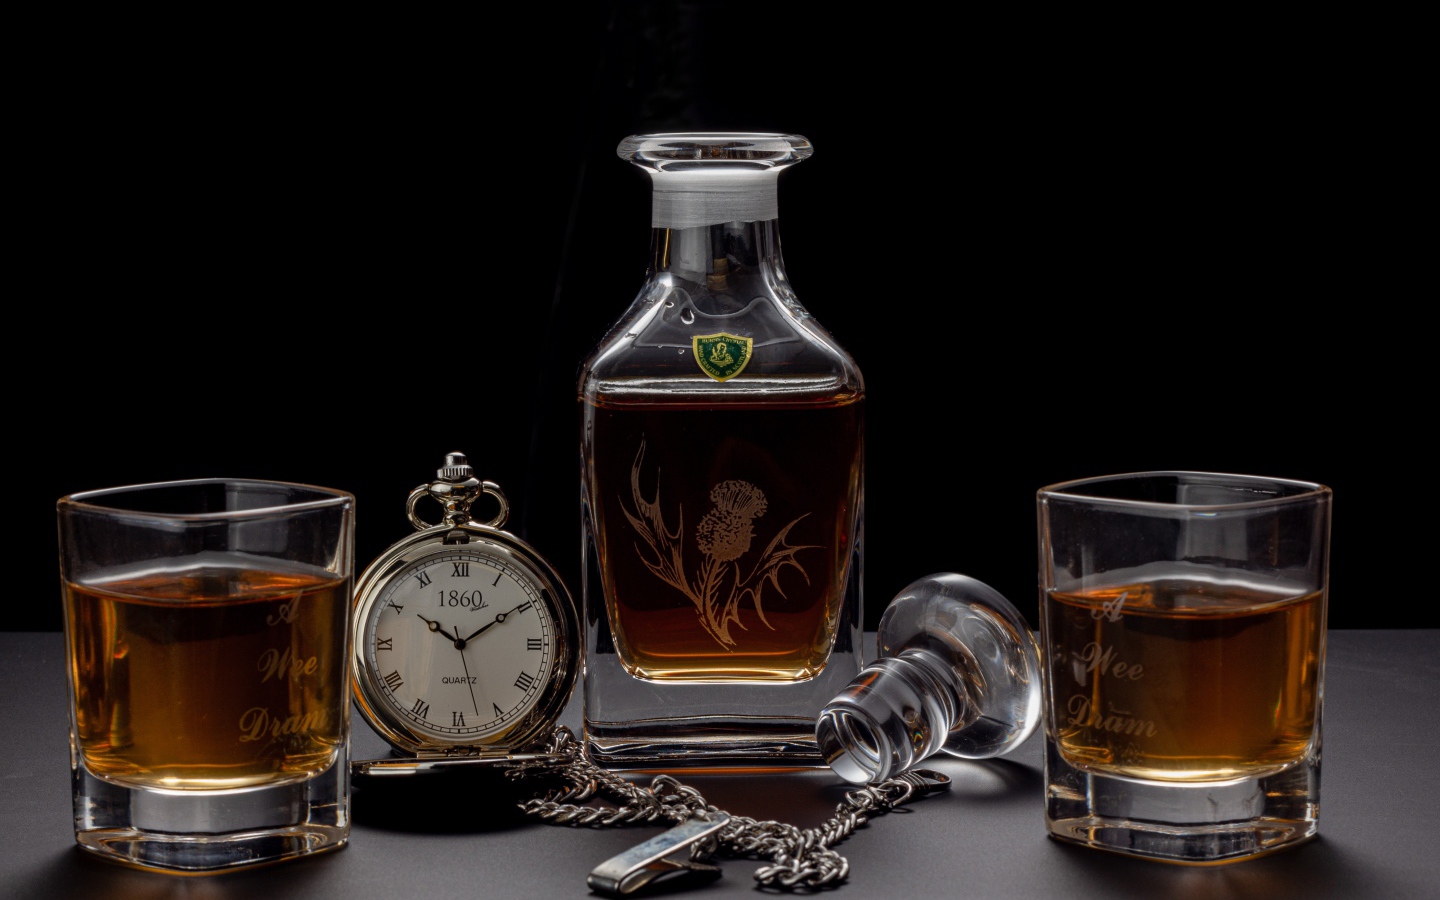 Expensive cognac on the table with a pocket watch